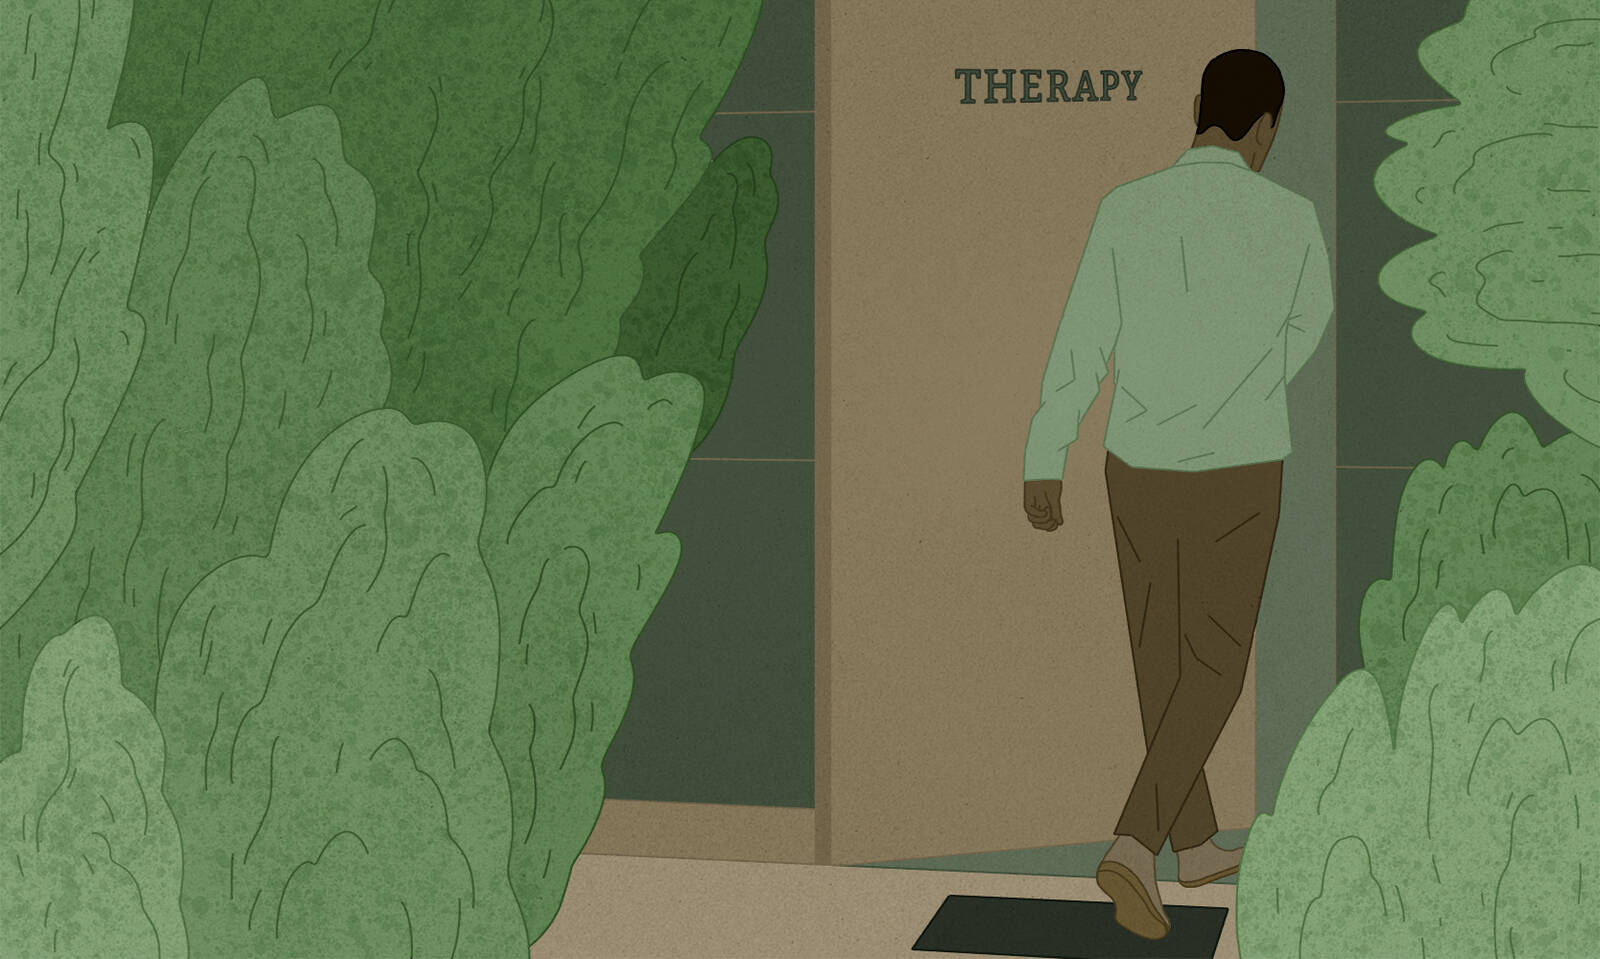 A man walks into a therapy room.